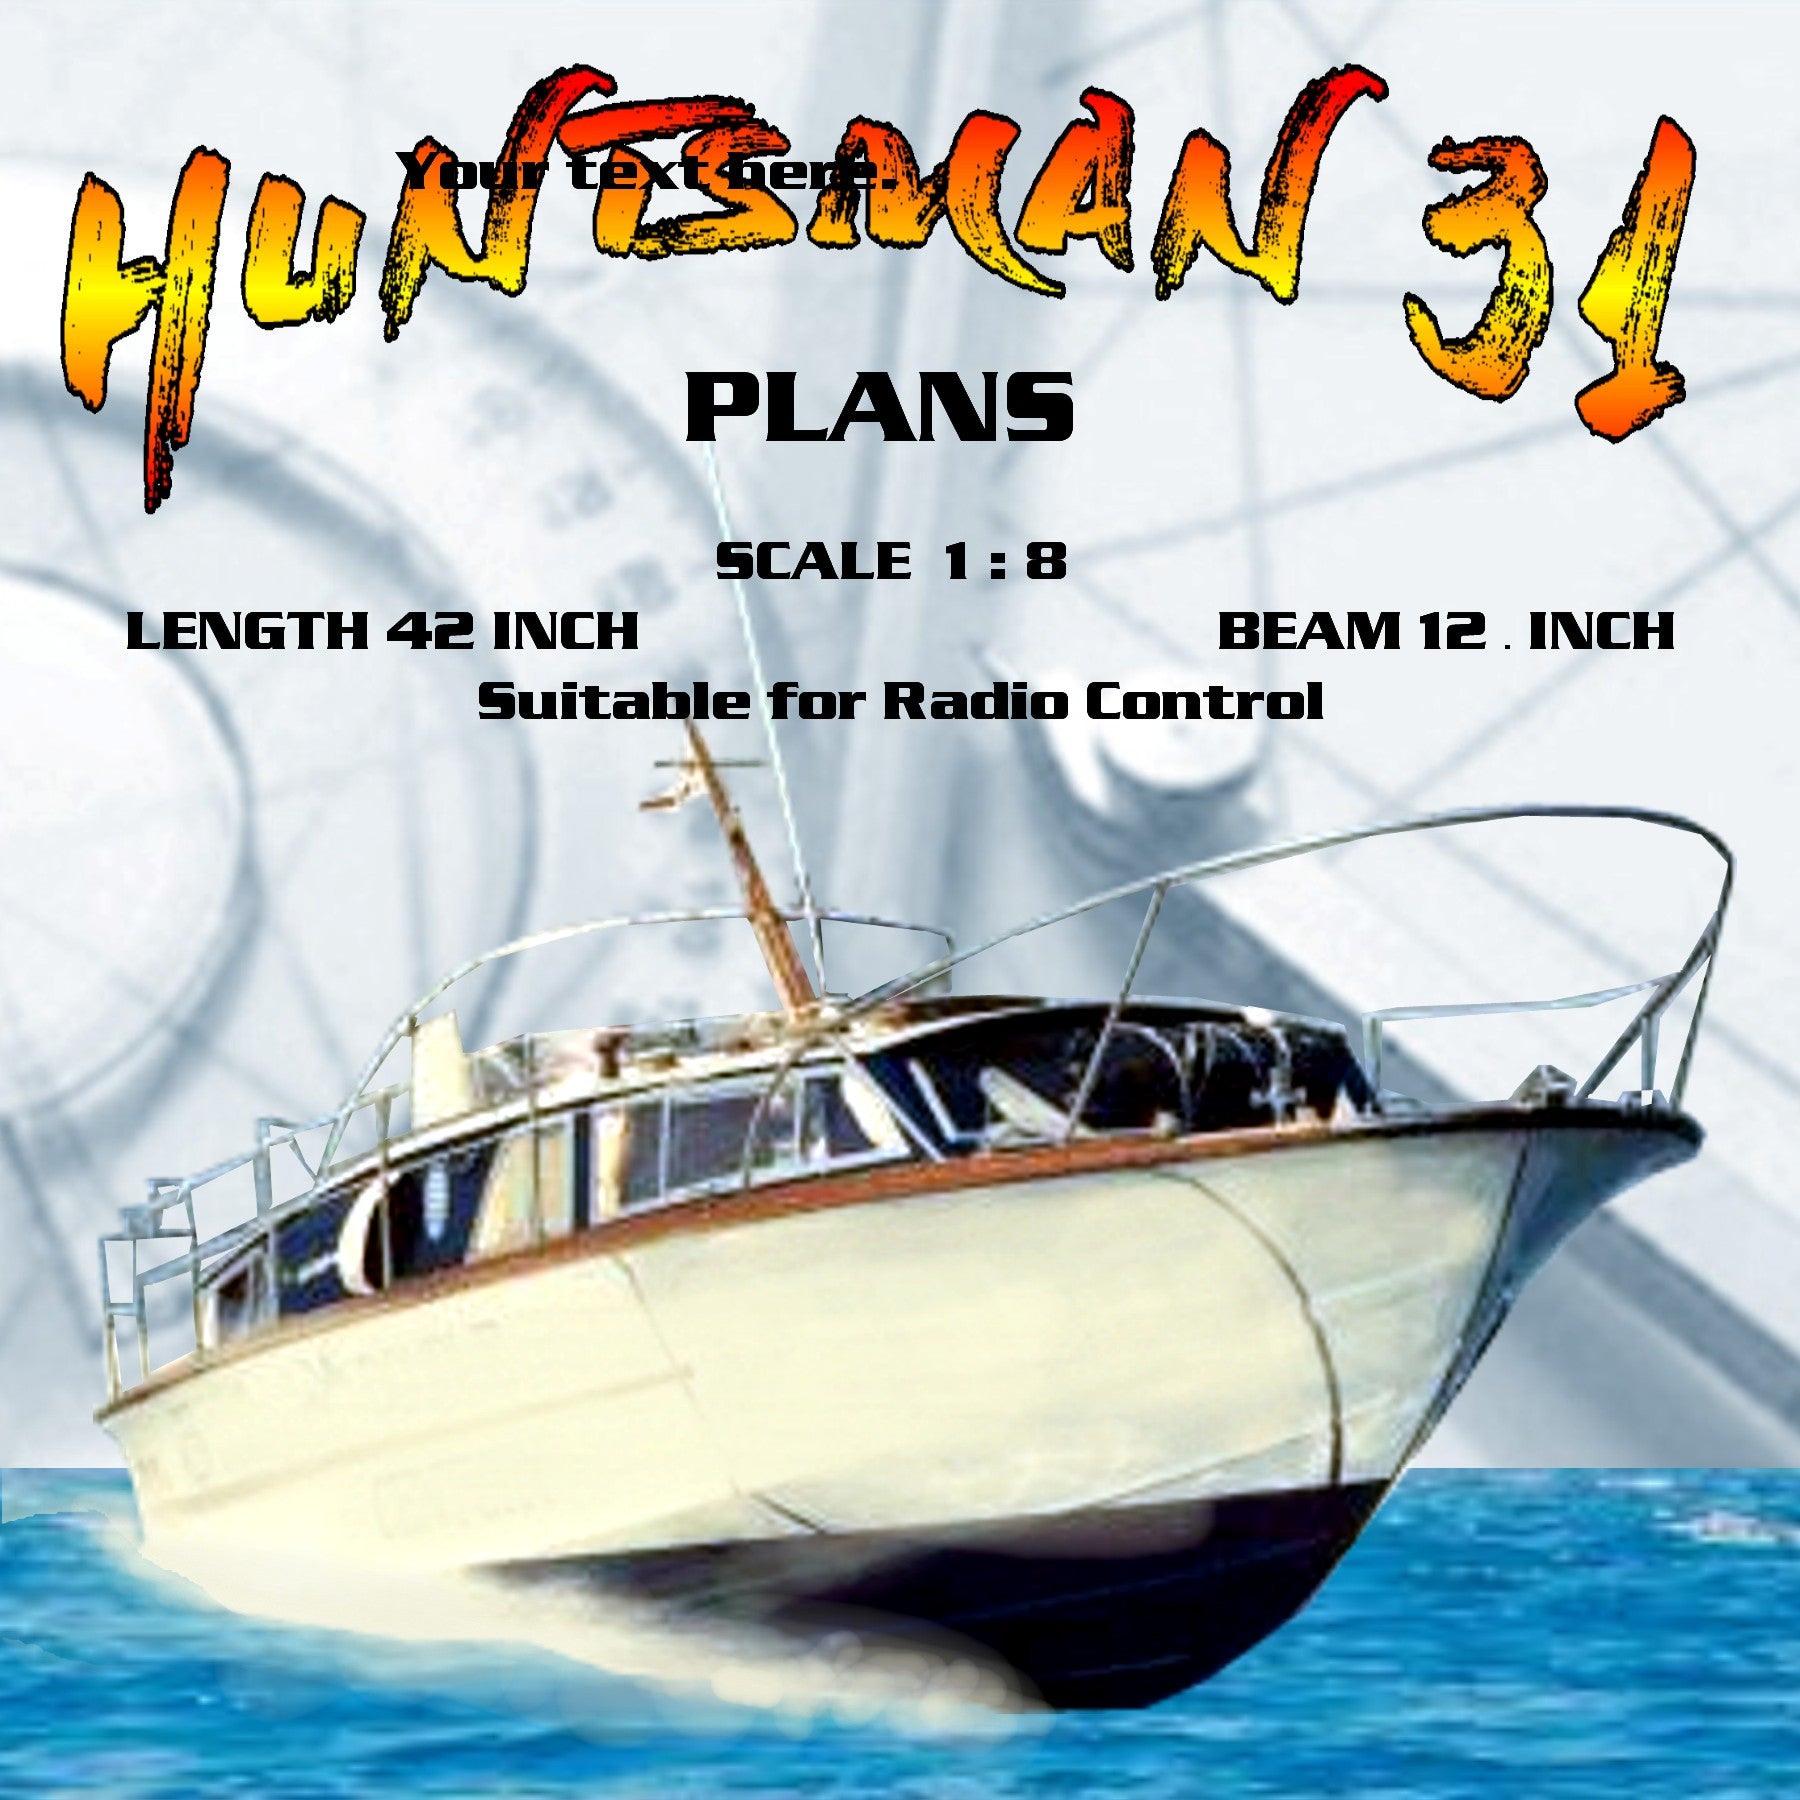 full size printed plans scale 1 1/2”= 1’   fairey marine huntsman 31 l 42" suitable for radio control